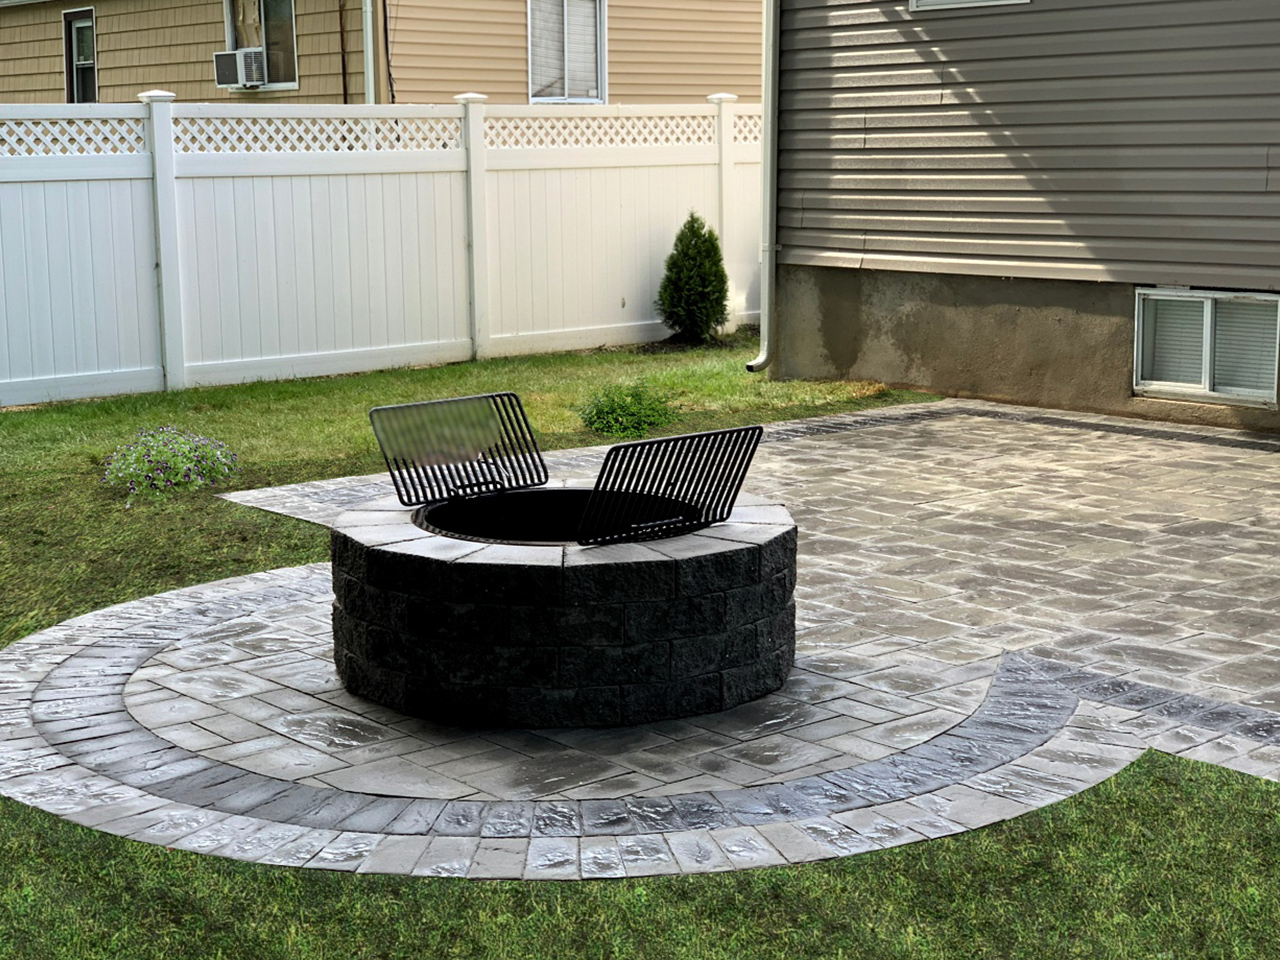 A focal point of the outdoor space, the Affordable Patio fire pit offers a perfect gathering spot for family and friends